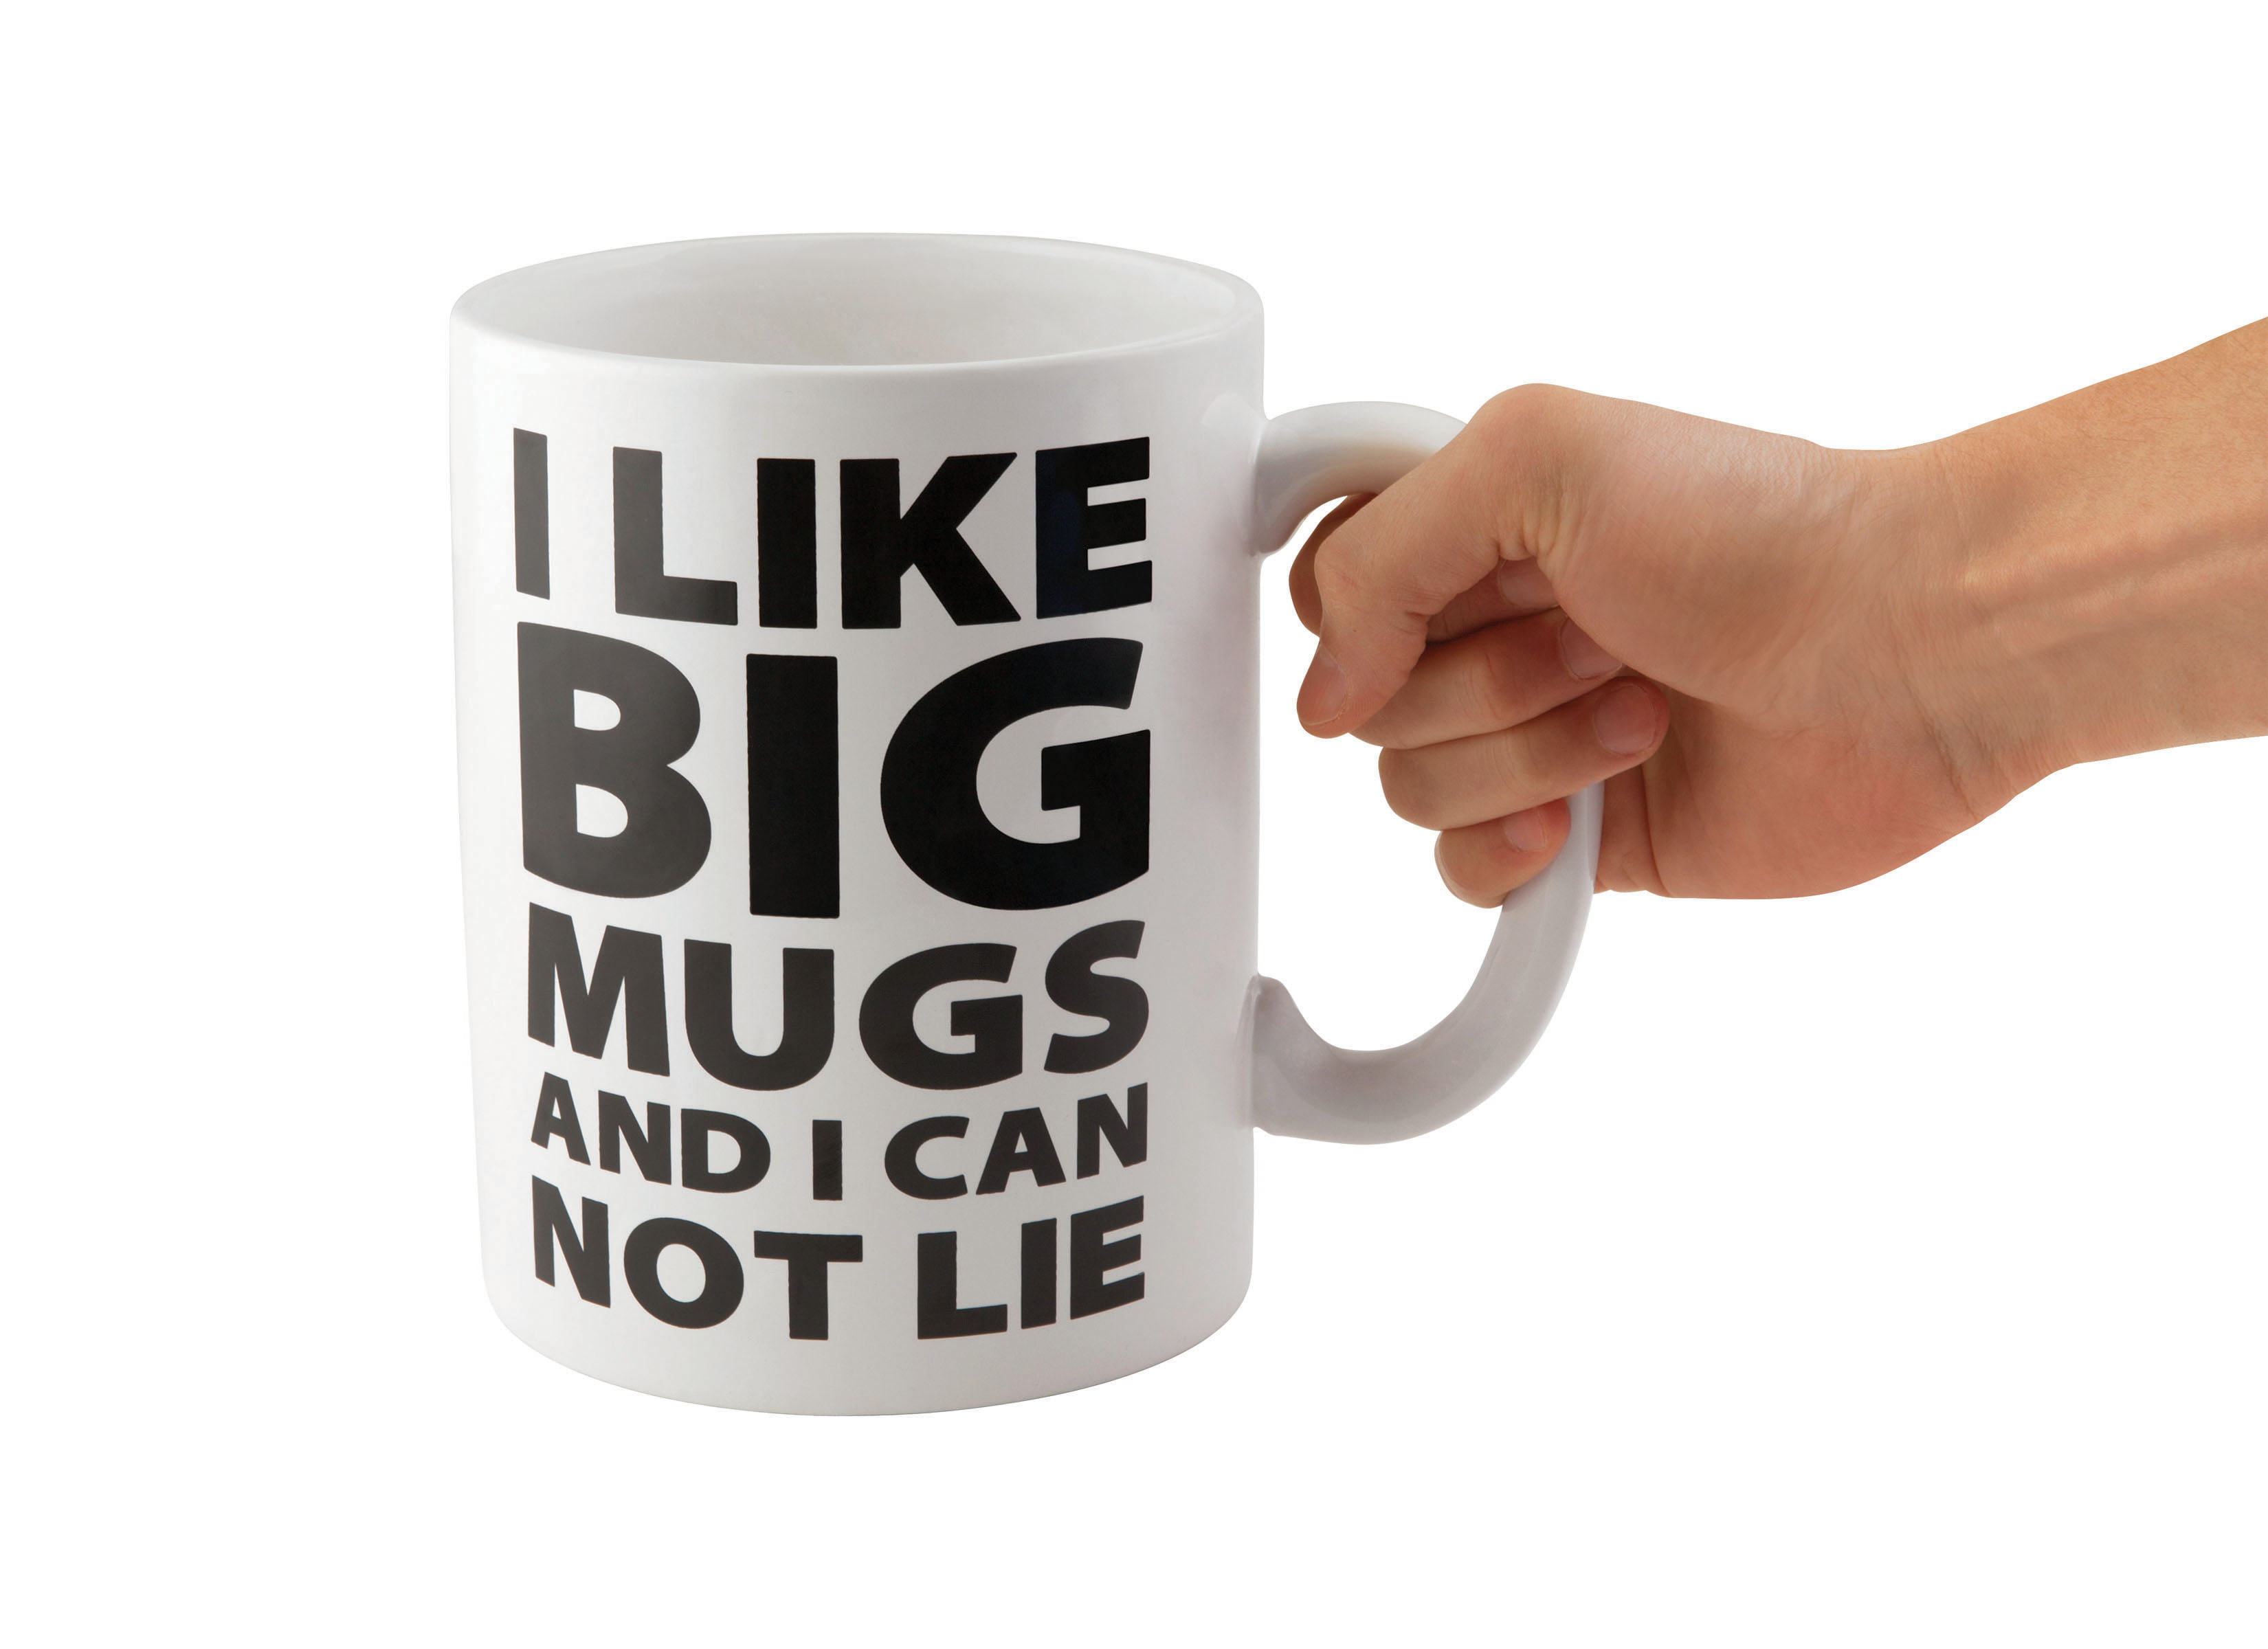 I’m Awesome Gigantic Mug Perfect for Gag Gift for Coffee Lovers BigMouth Inc Hilariously Huge 64 oz Ceramic Coffee Cup